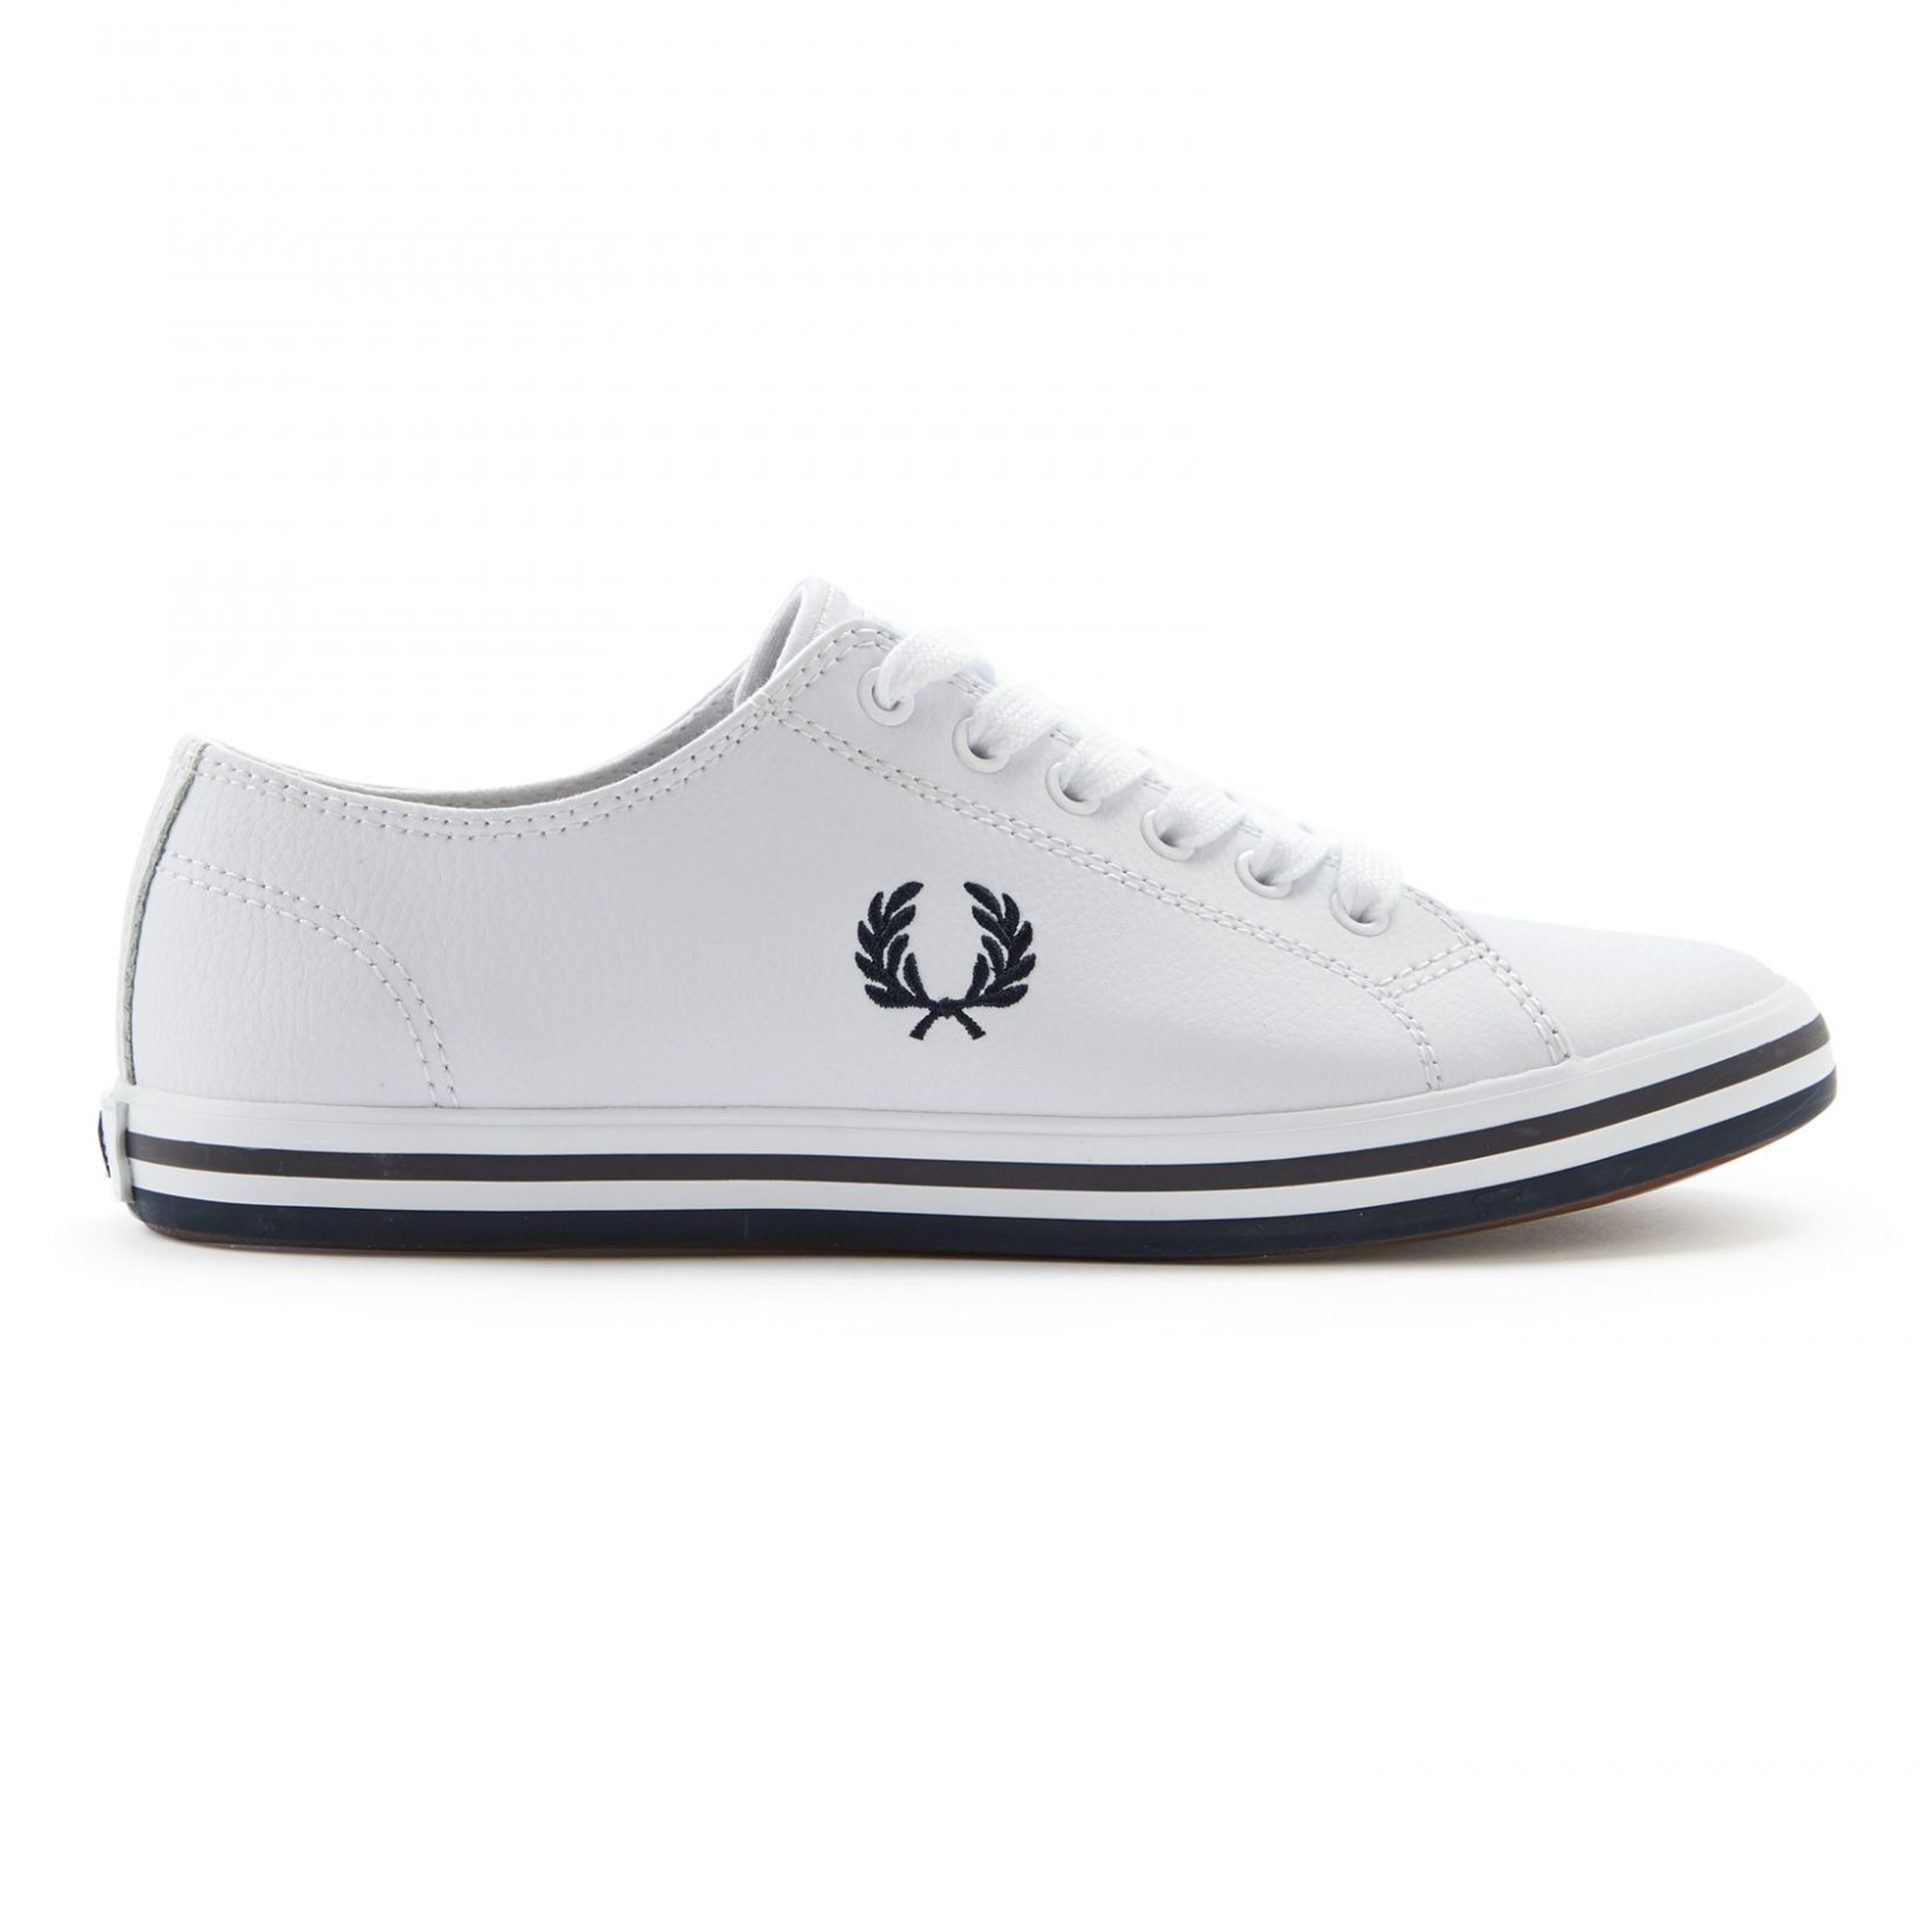 Aftensmad rod paperback FRED PERRY KINGSTON LEATHER TENNIS SHOES